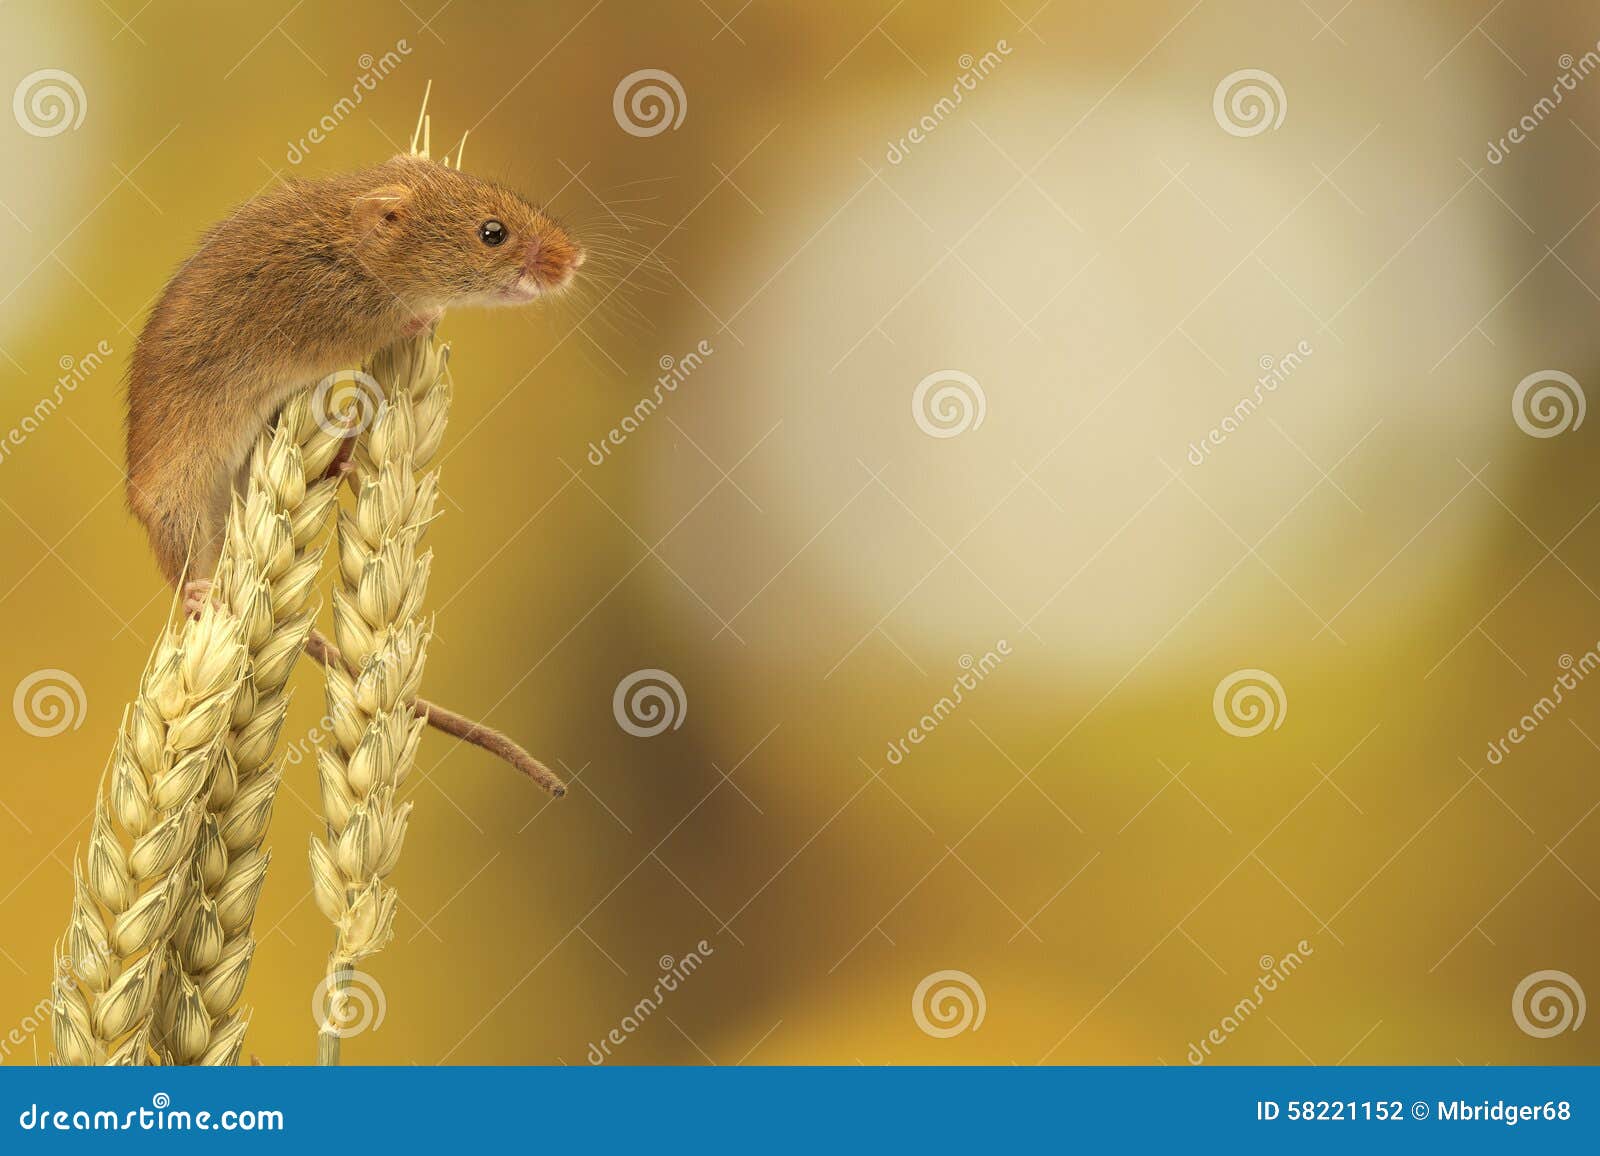 harvest mouse on wheat